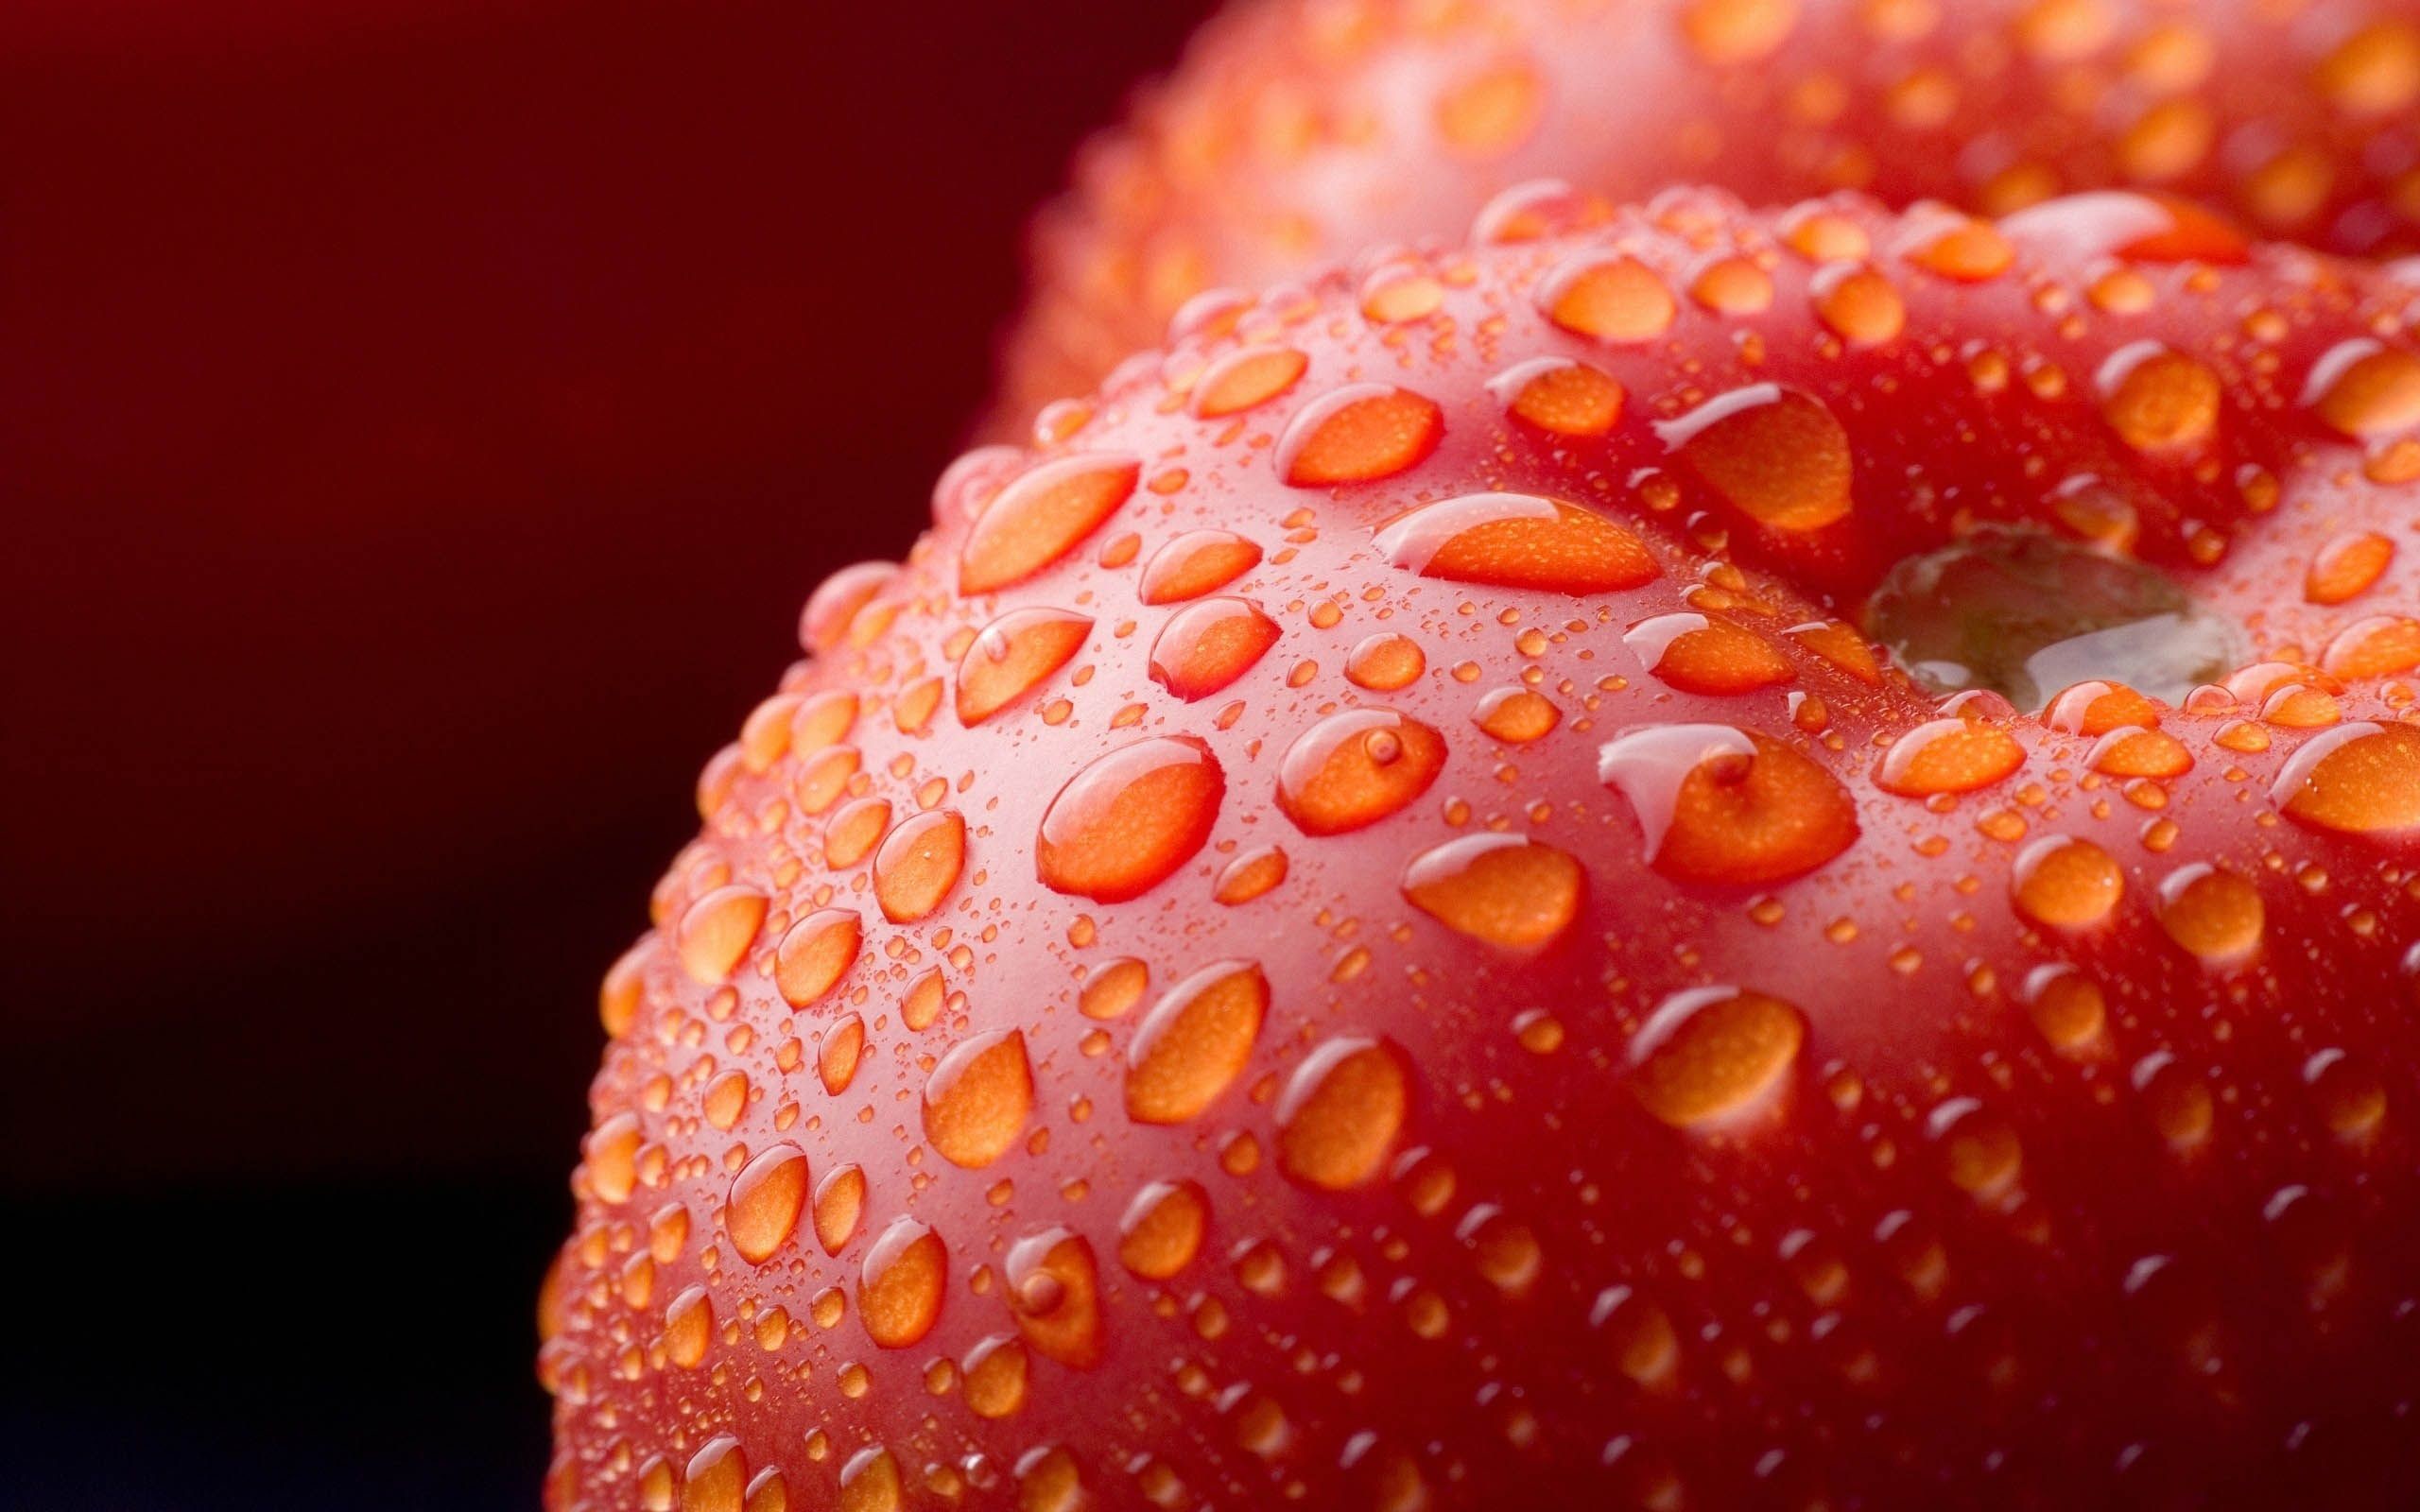 Drops On Cherry Fruit - Macro Photo Of Food , HD Wallpaper & Backgrounds